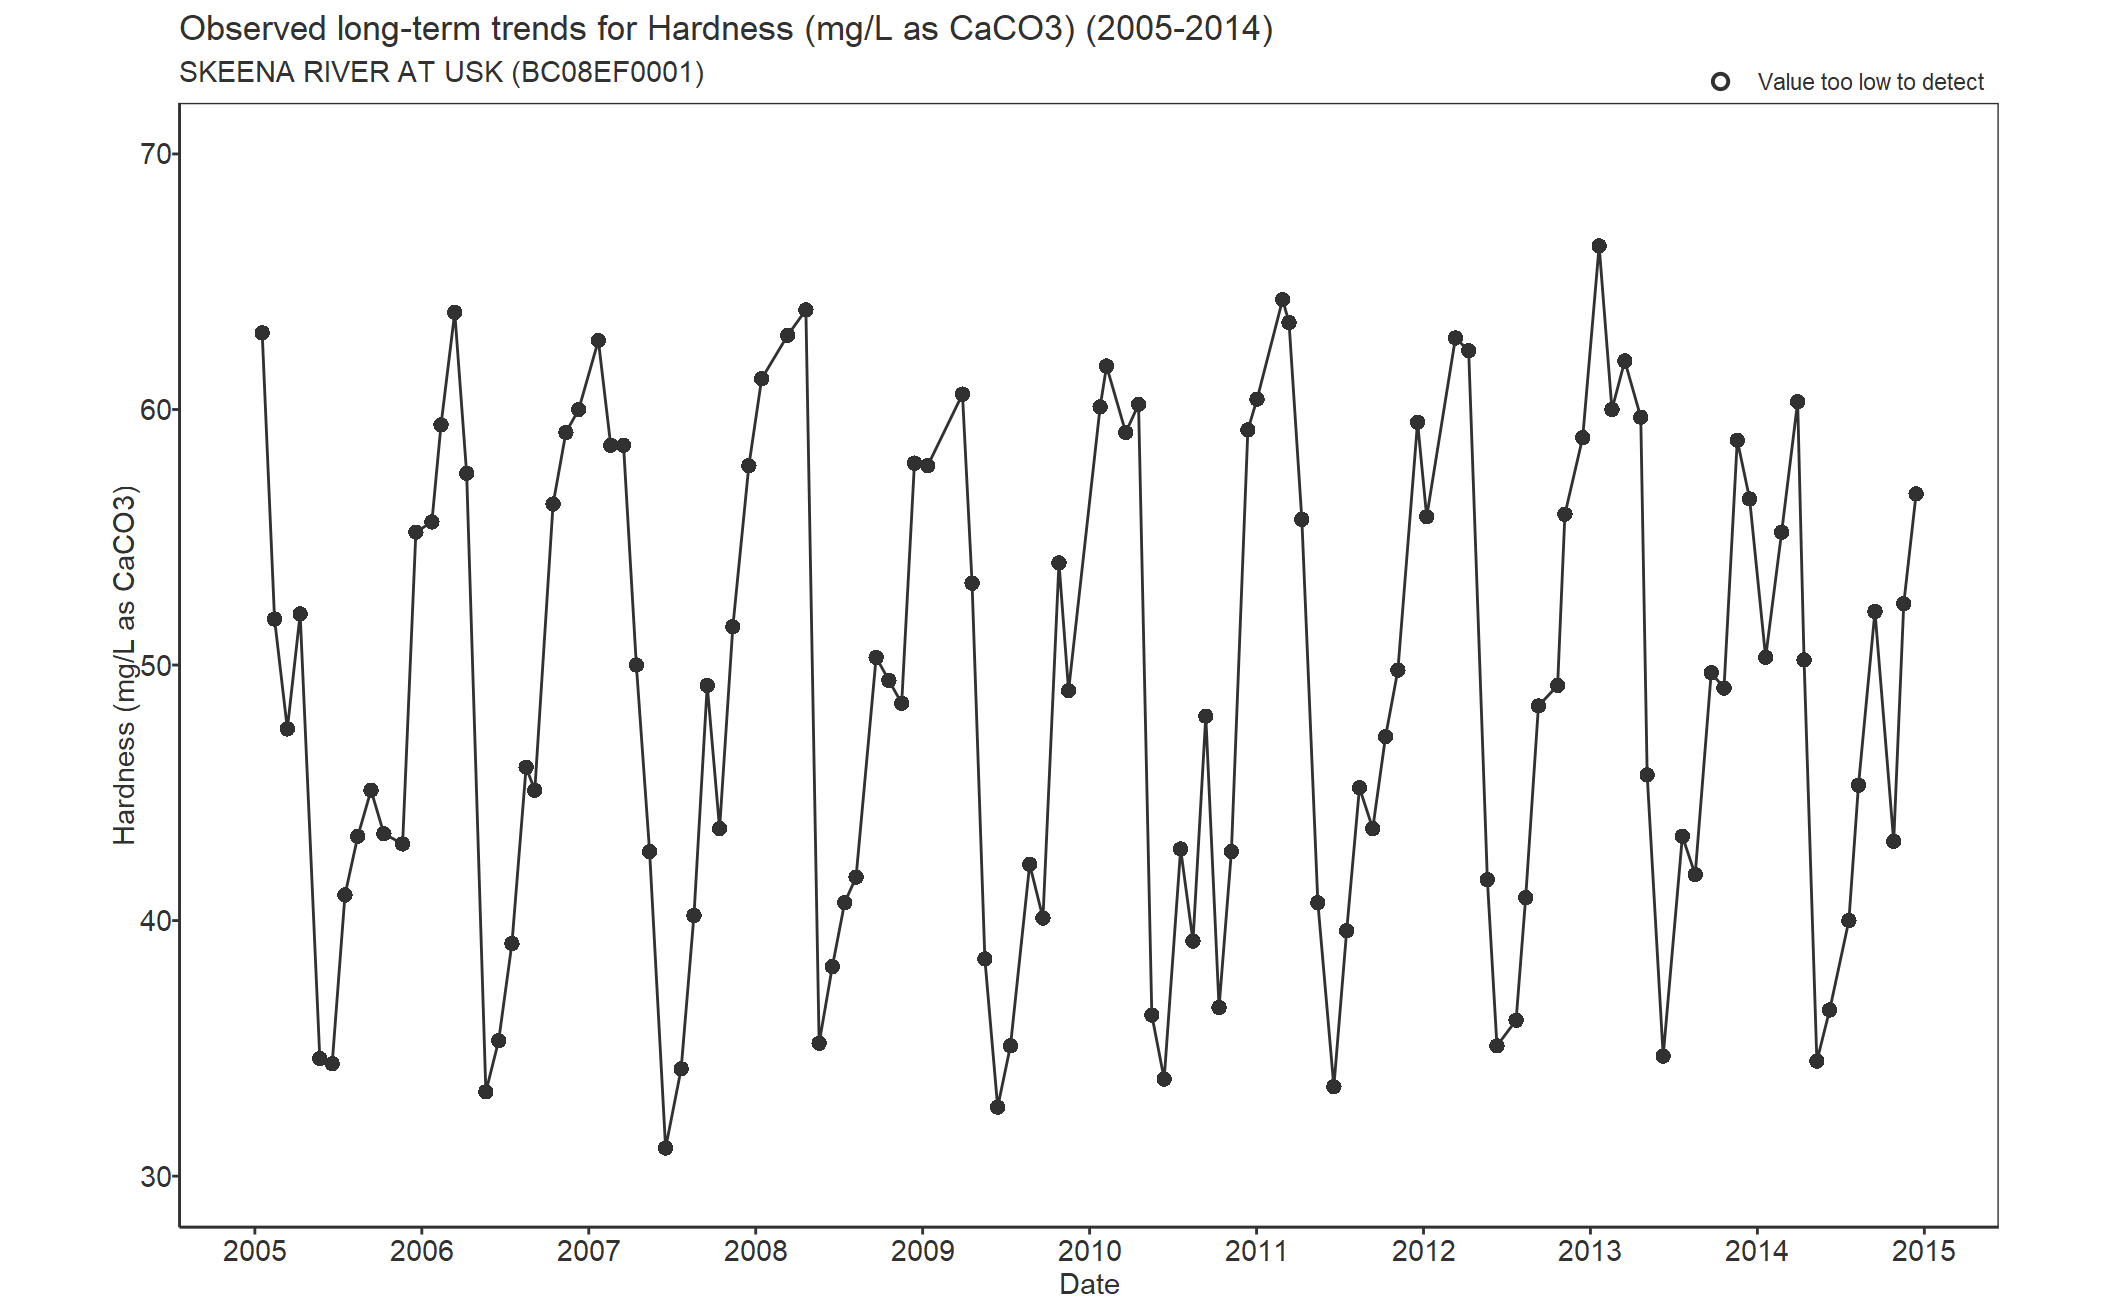 Observed long-term trends for Hardness (2005-2014)